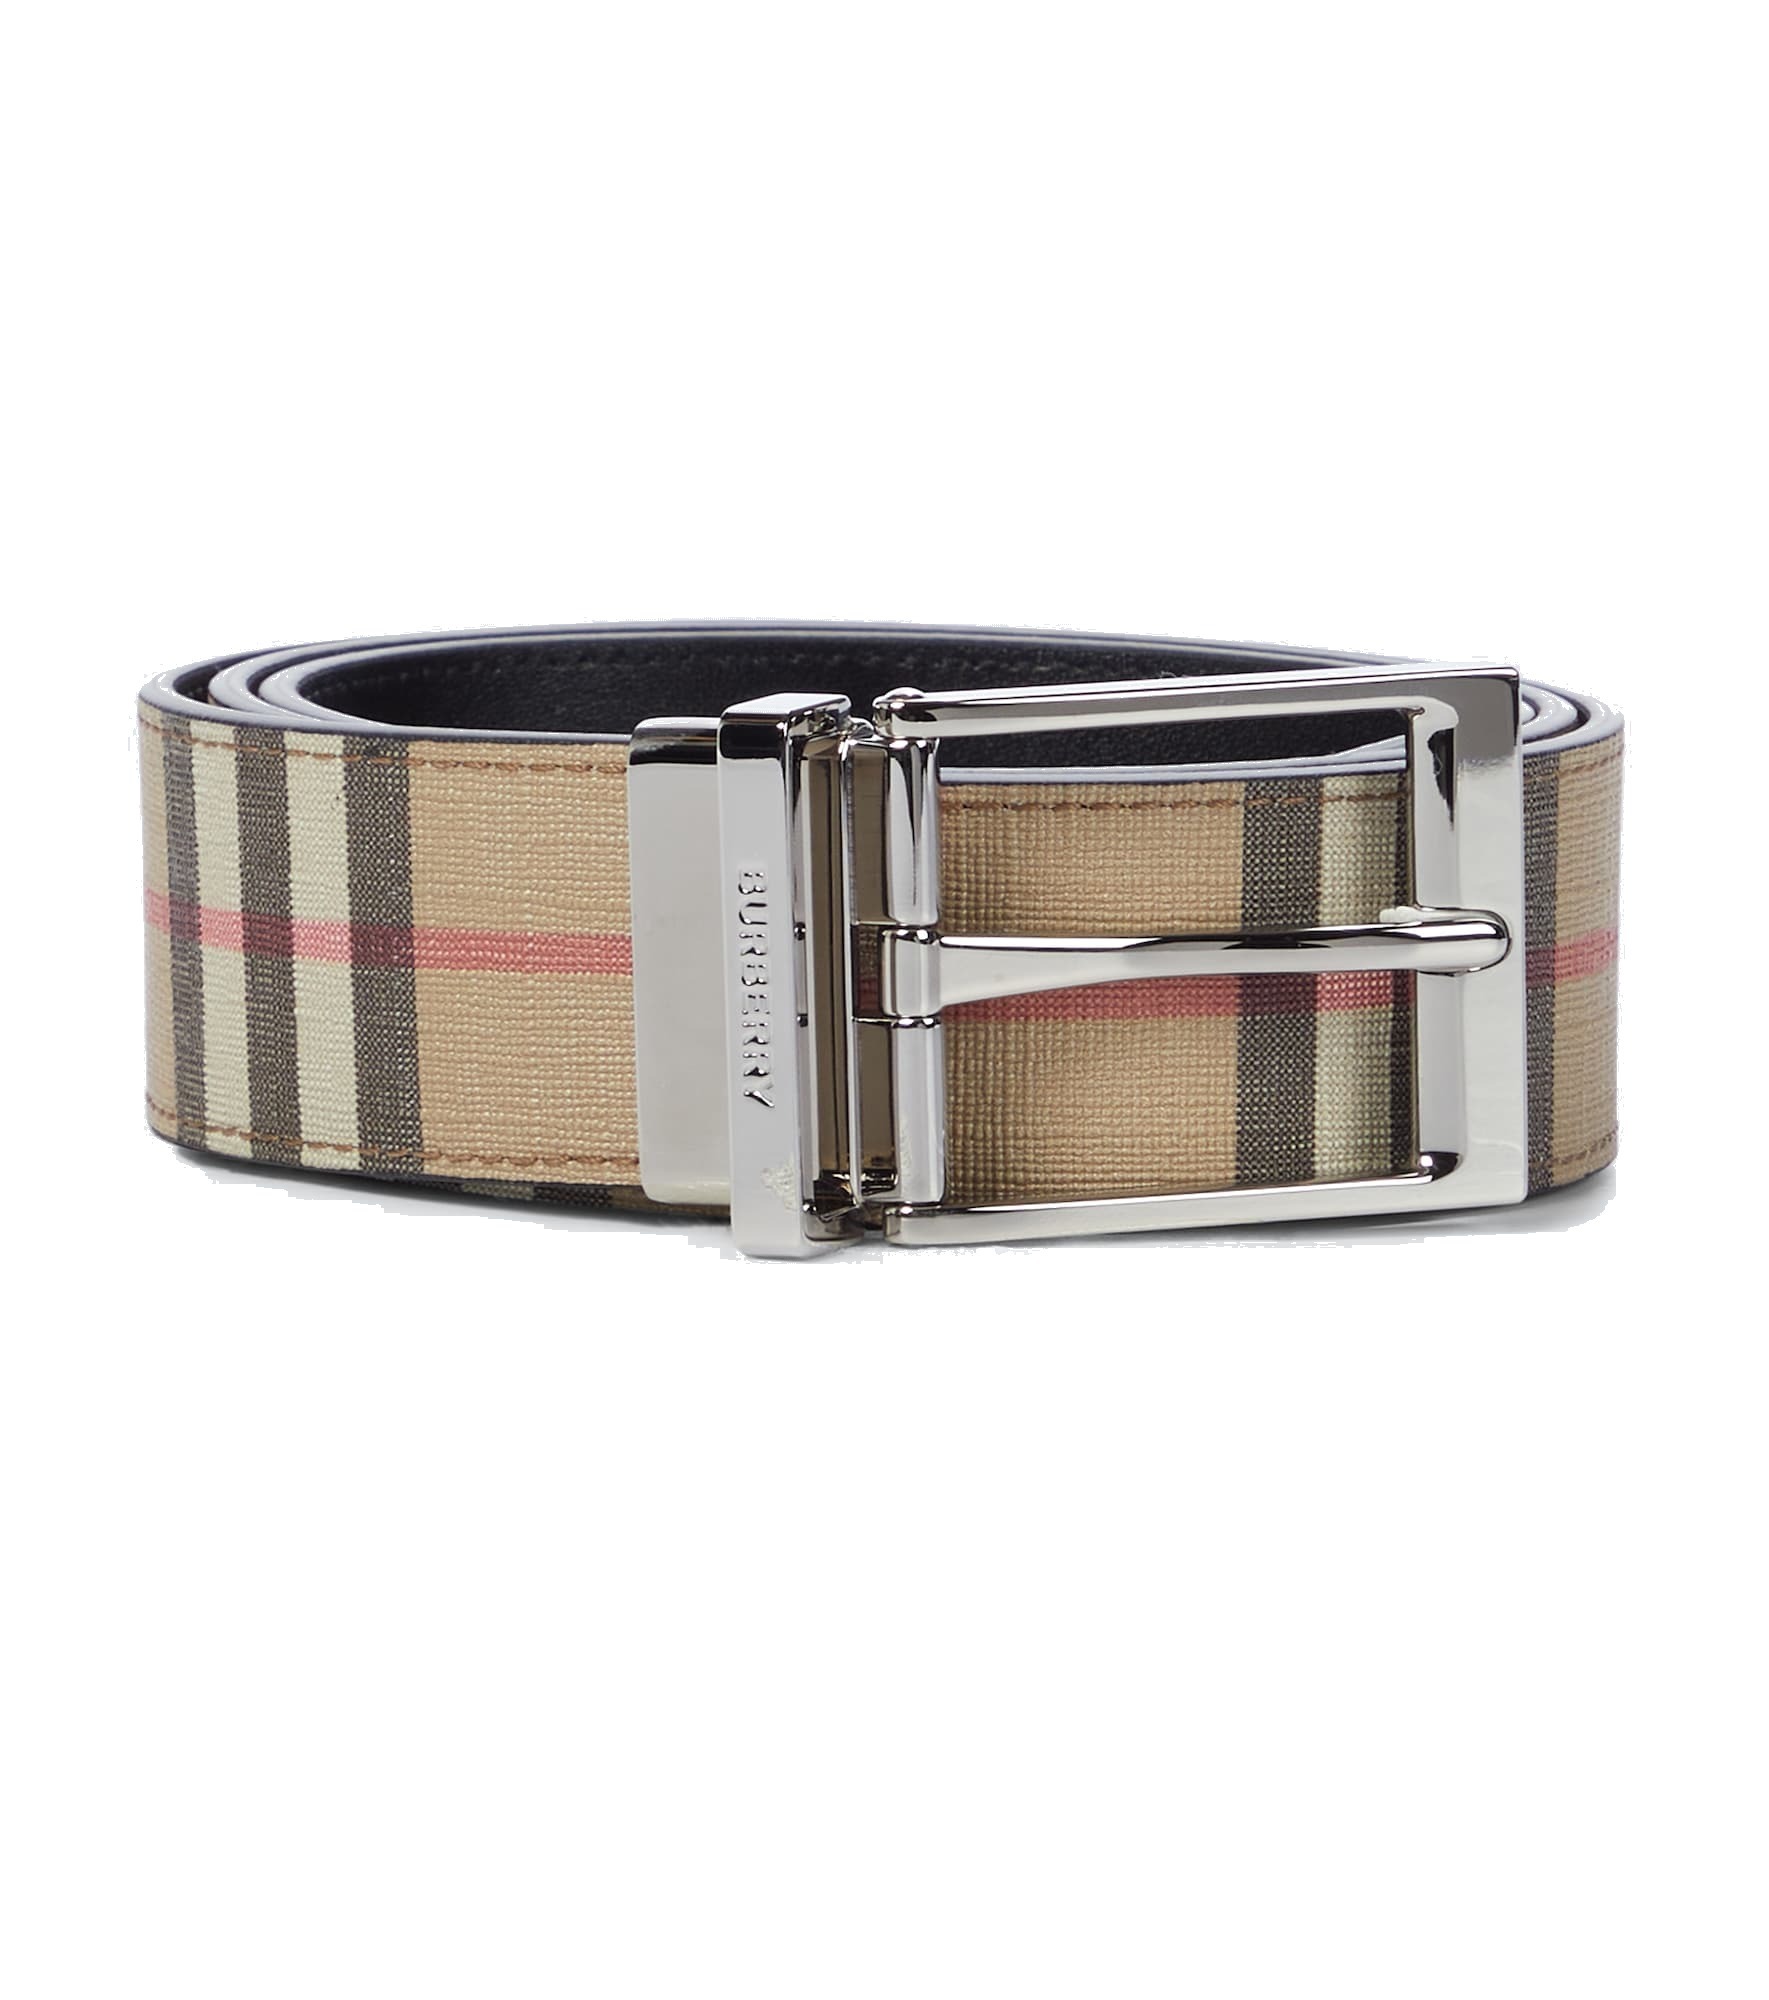 Burberry - Reversible leather belt Burberry